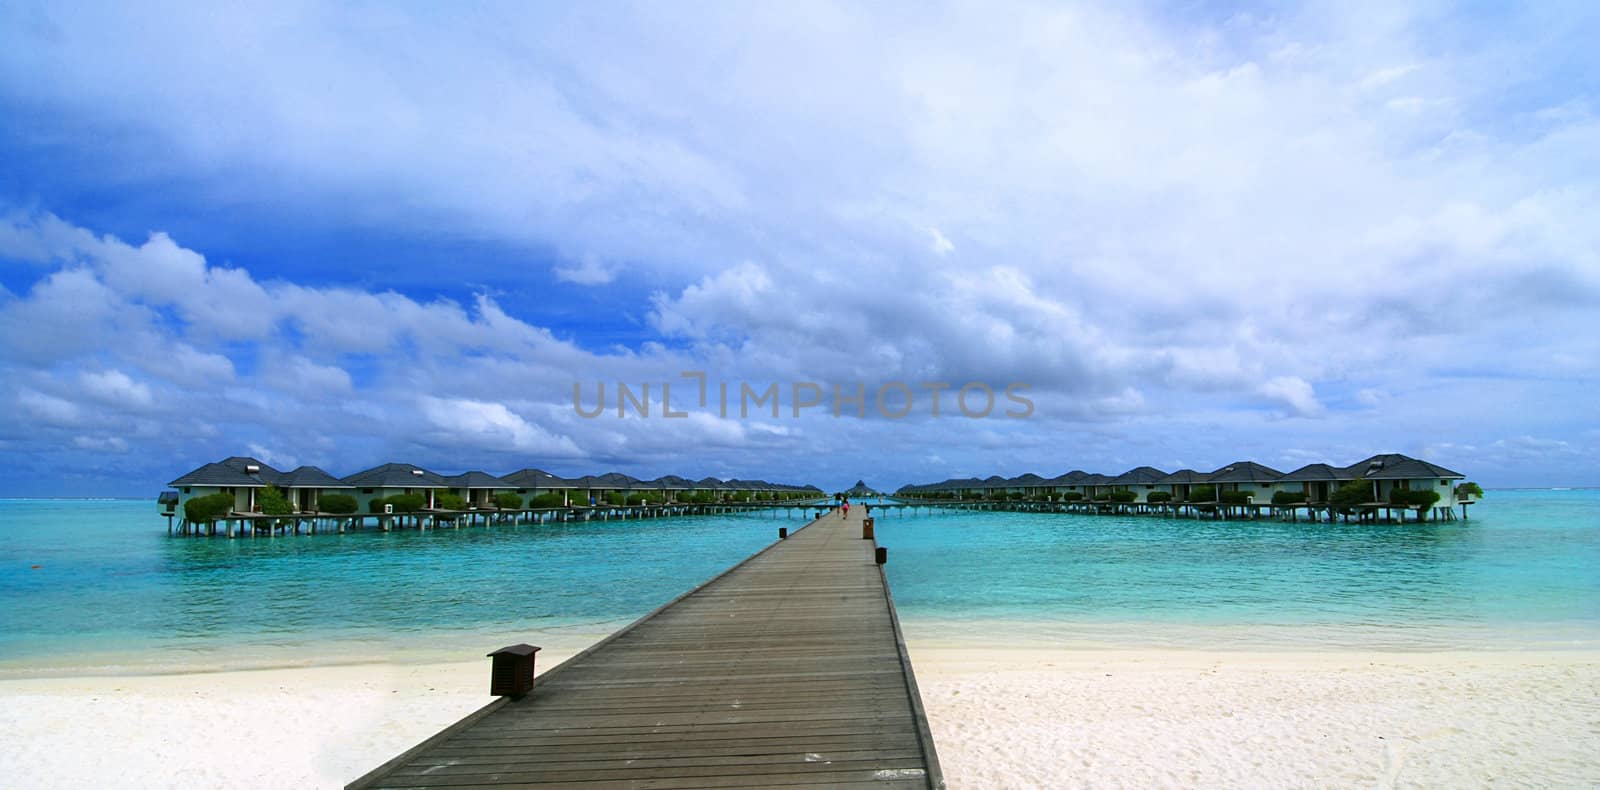 Panoramic photo of water bungalows and jetty in the Maldives